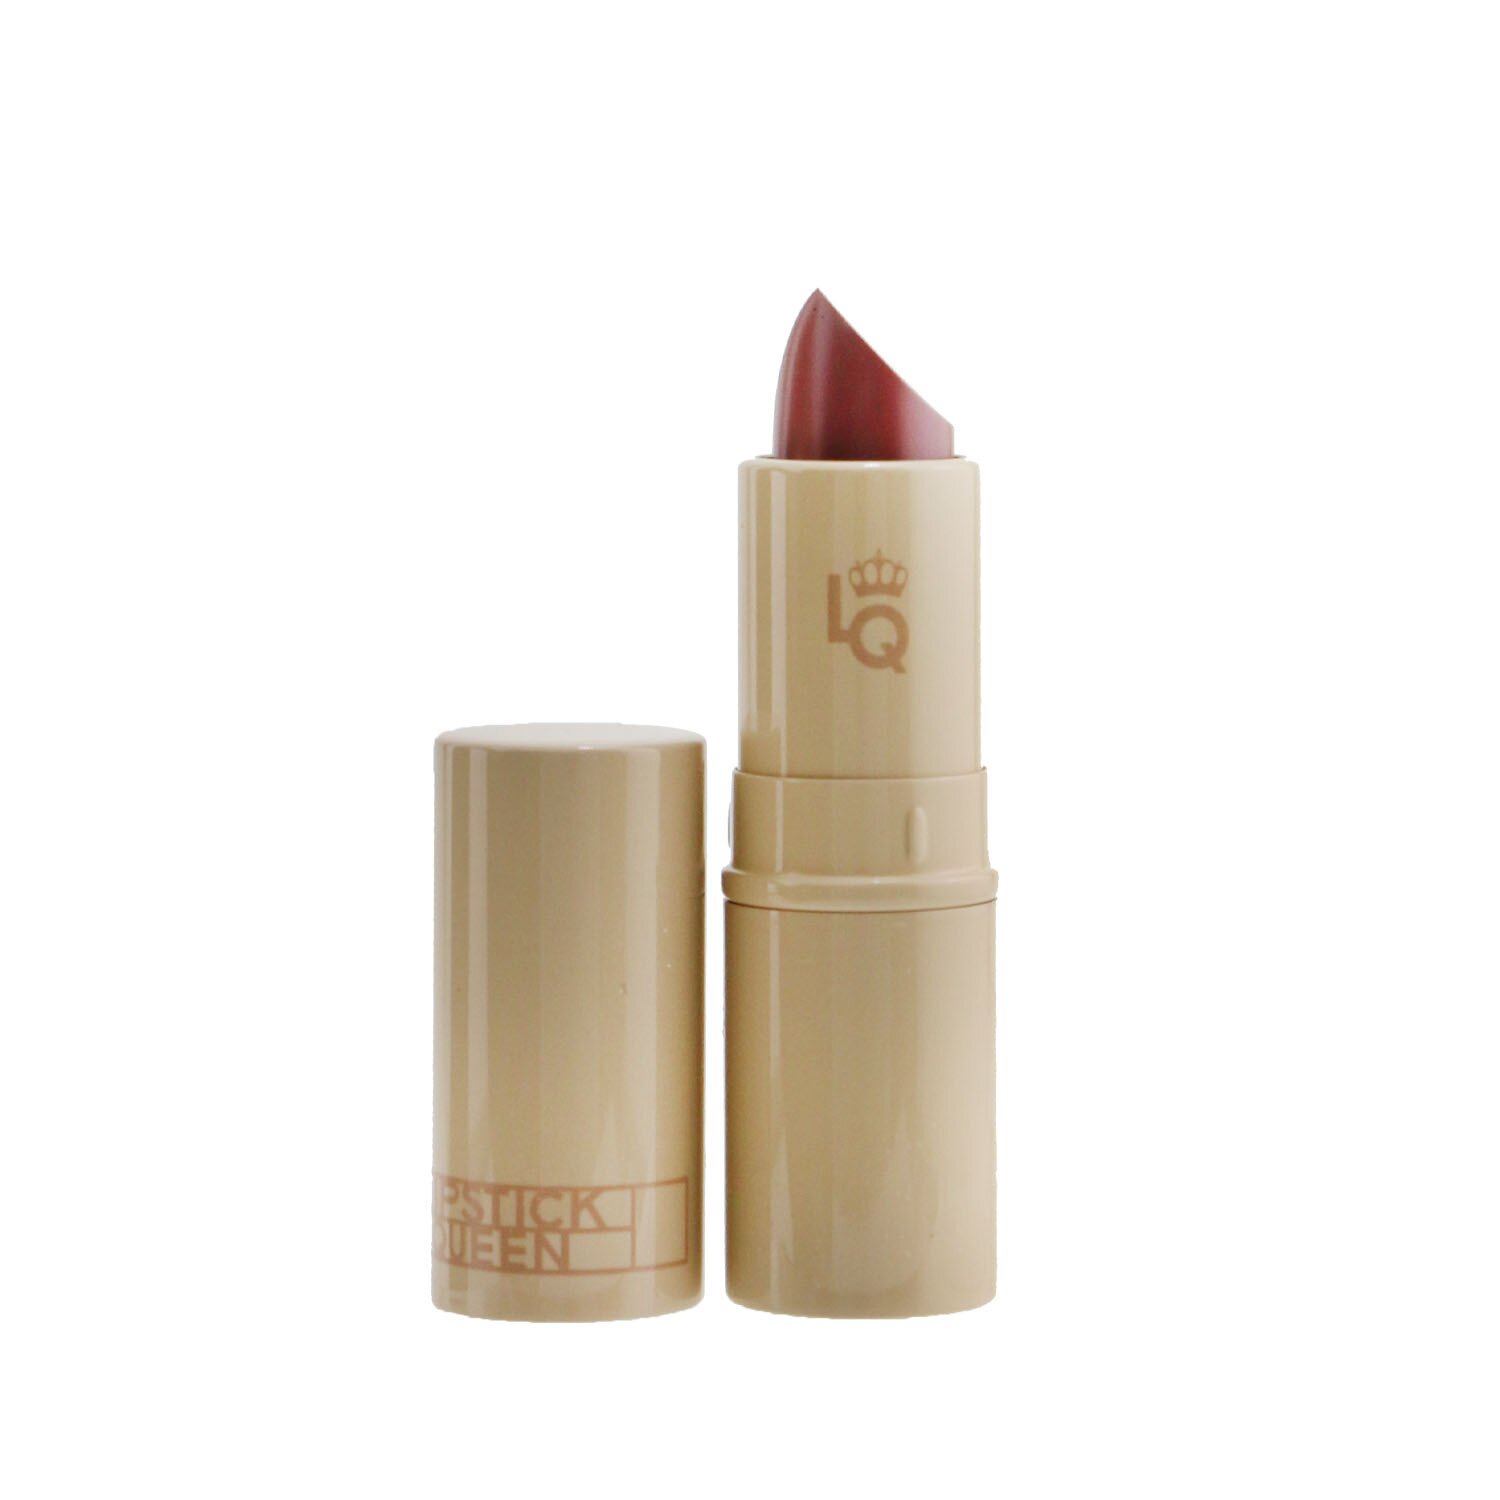 Lipstick Queen Nothing But The Nudes Lipstick 3.5g/0.12oz